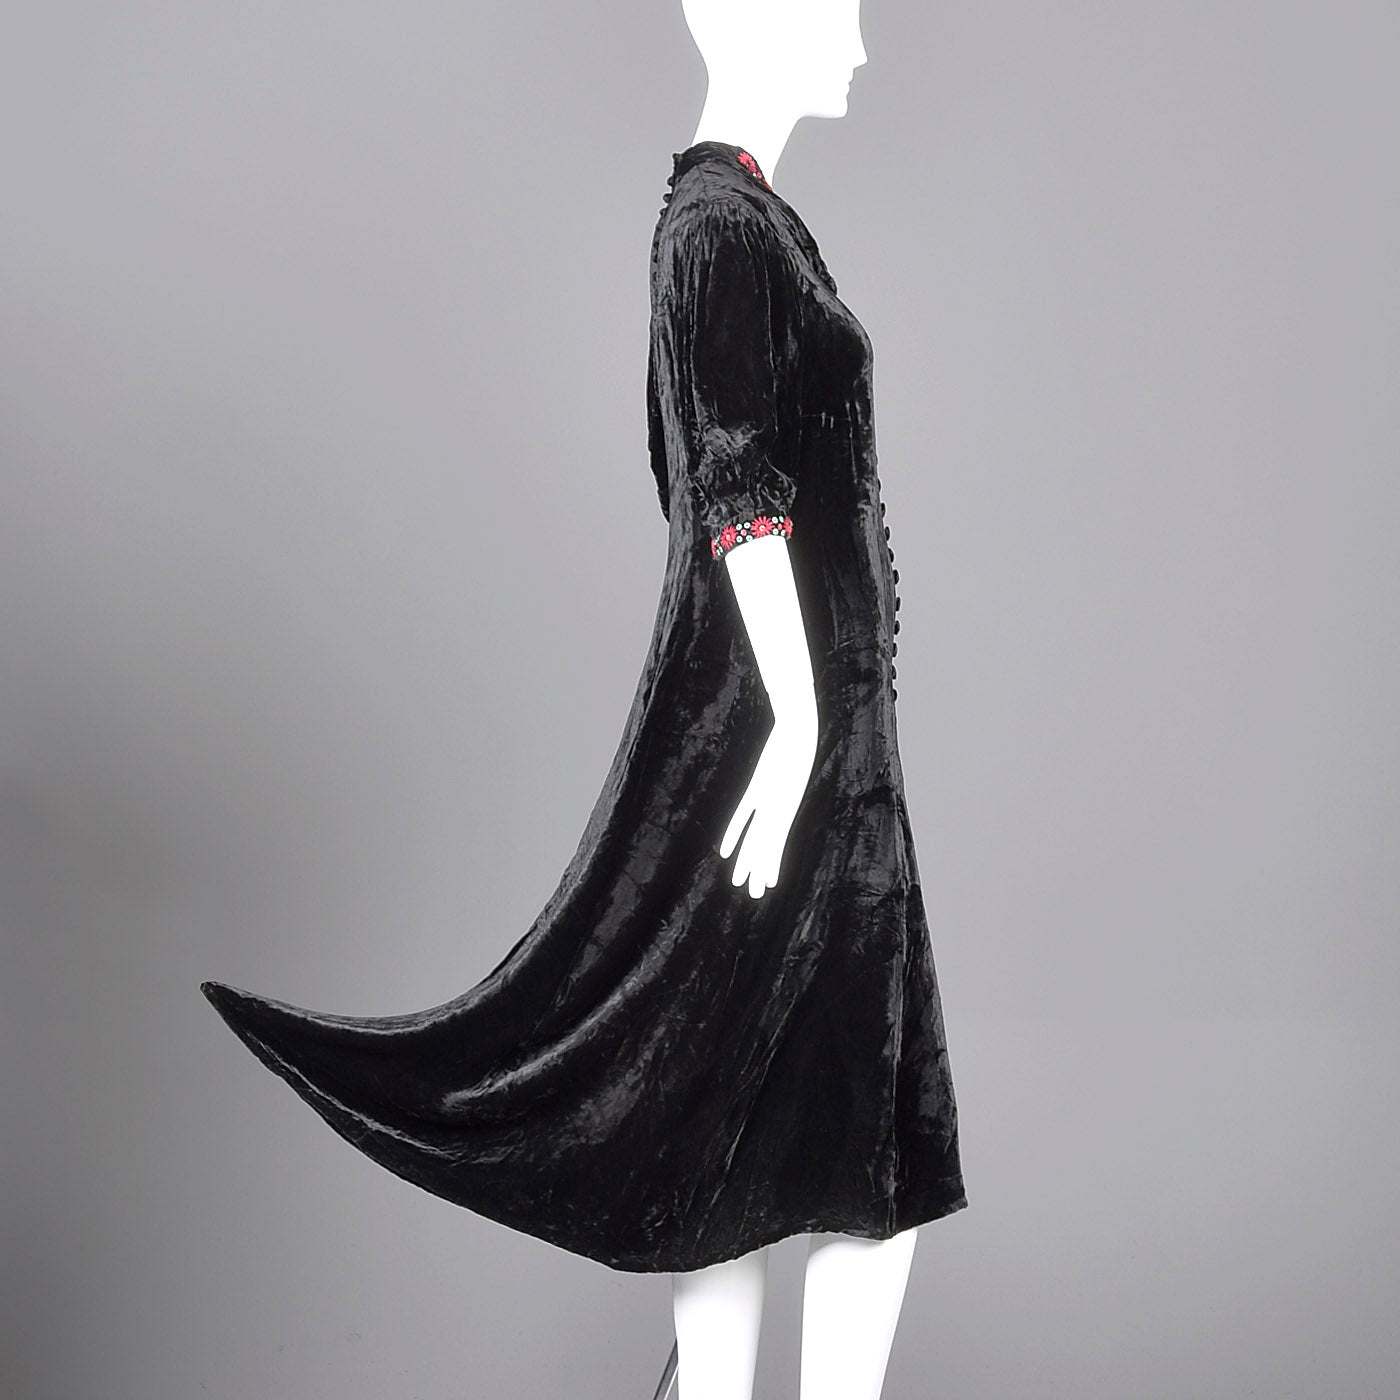 1930s Velvet Dress with Beading and Embroidery Trim